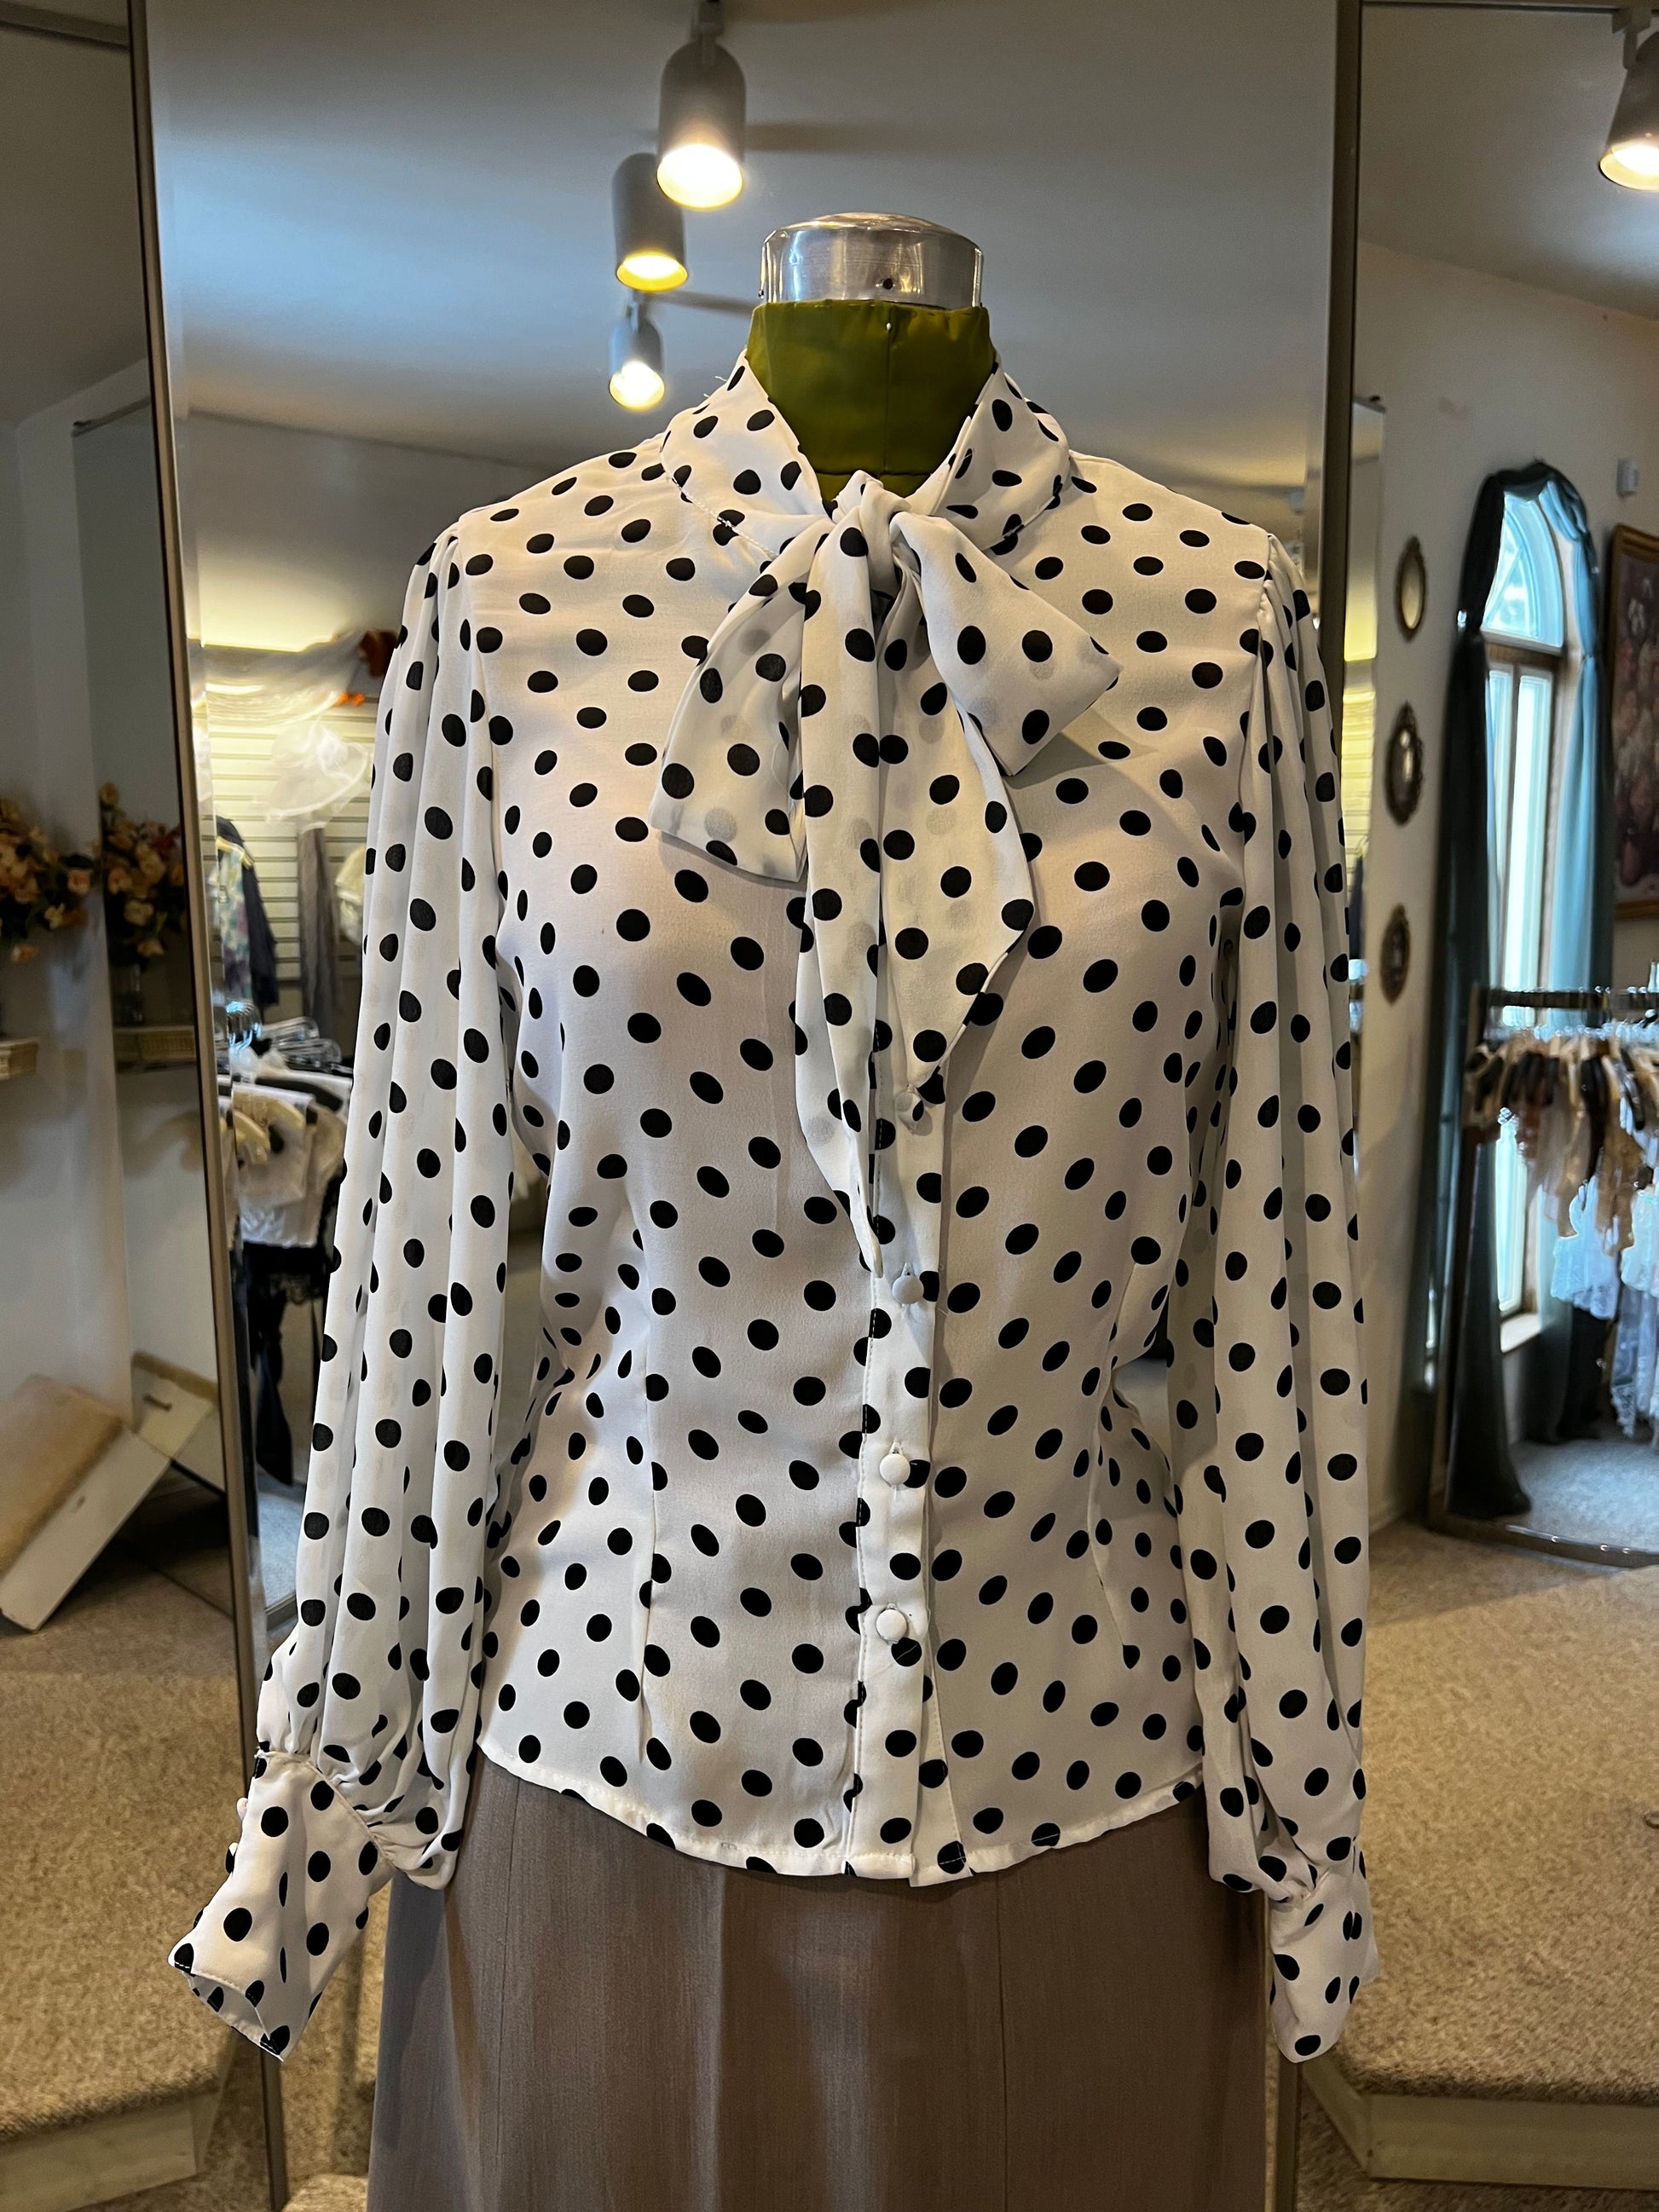 1940s and 50s inspired blouse with polka dots